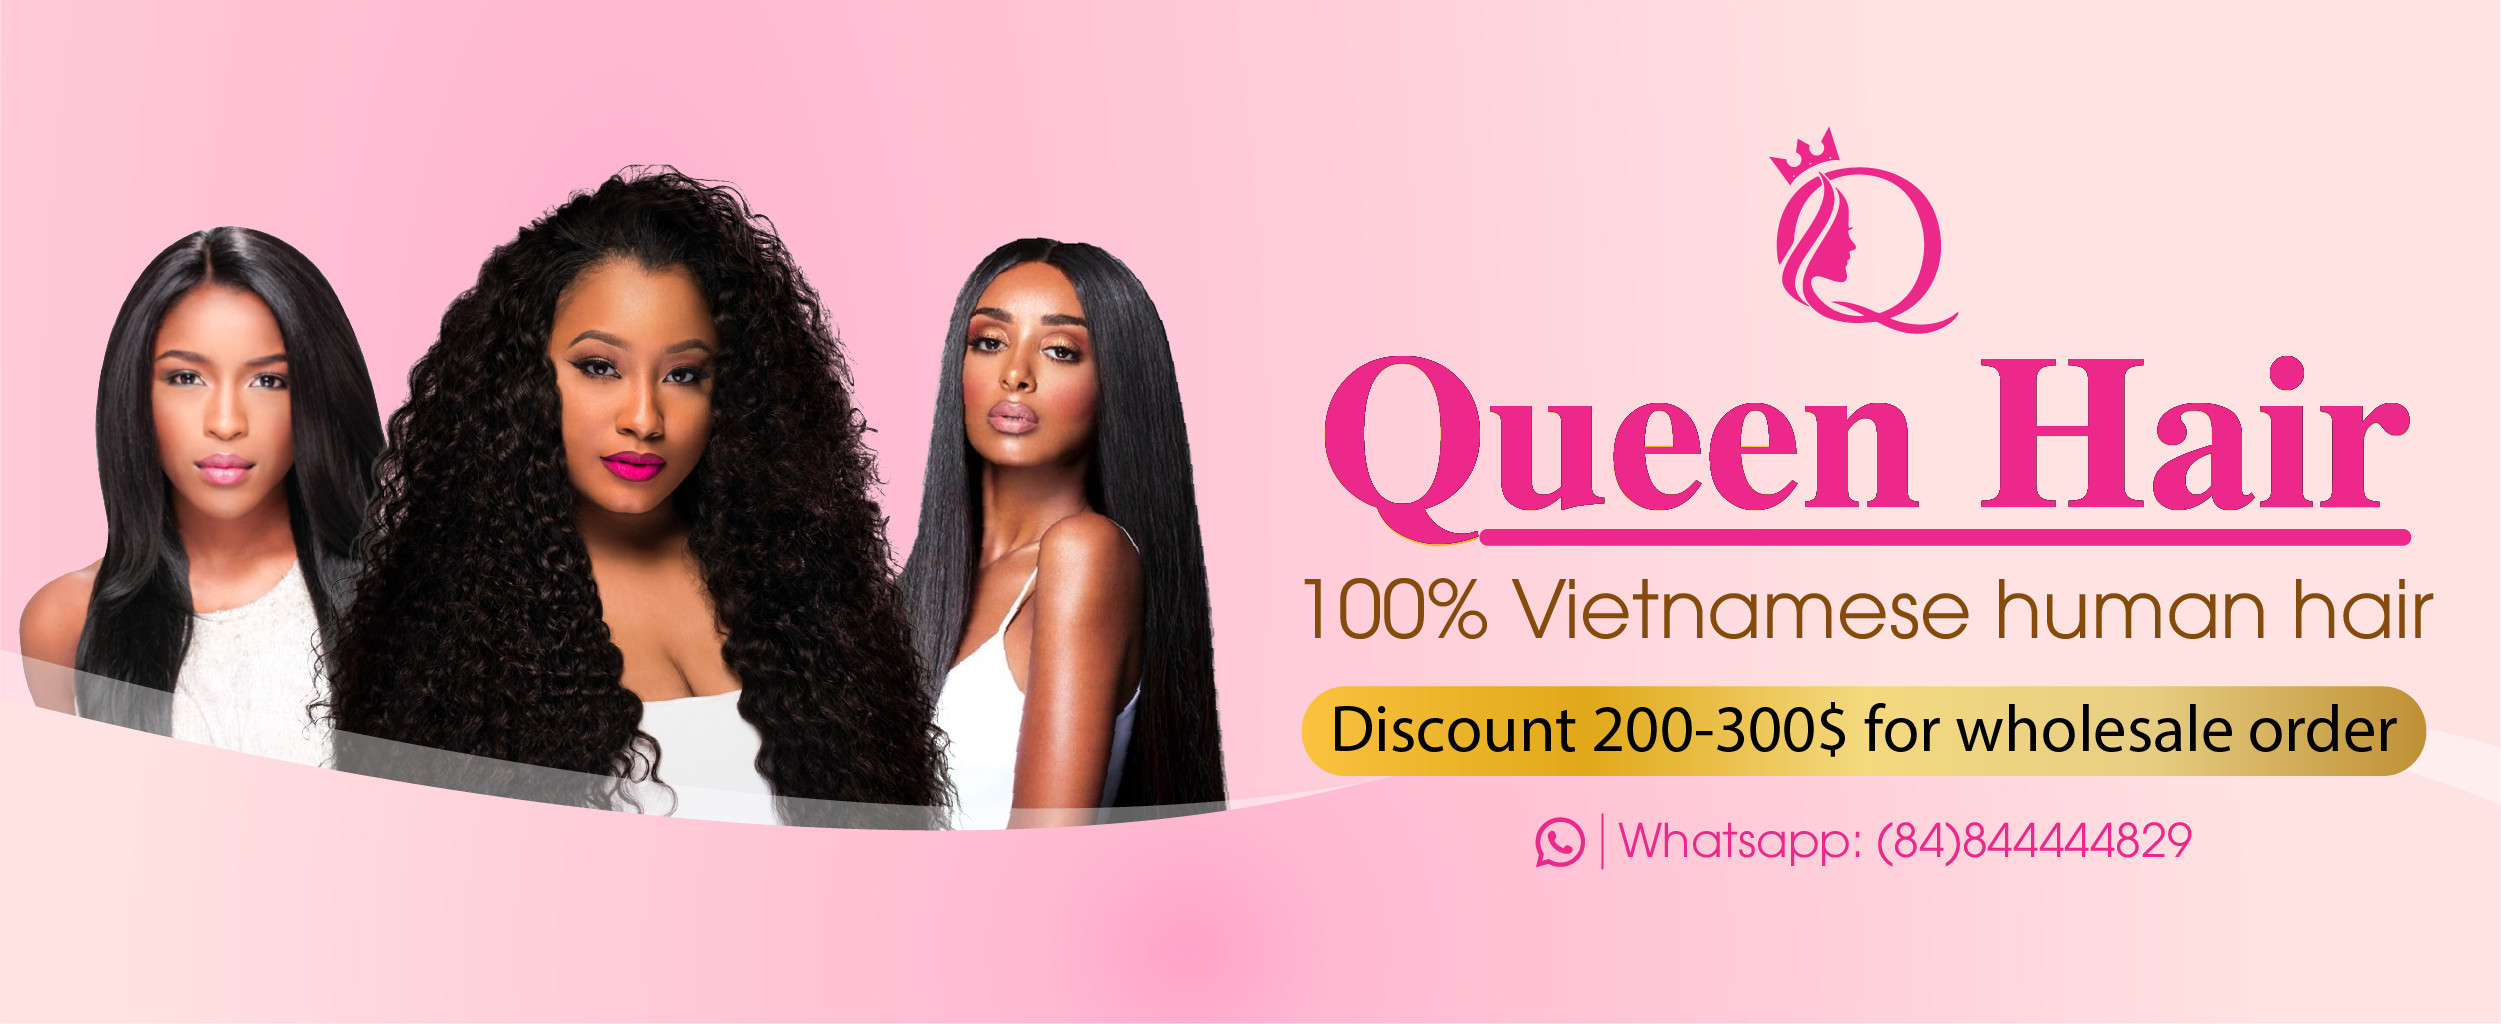 Wholesale-hair-vendors-in-Chicago-5